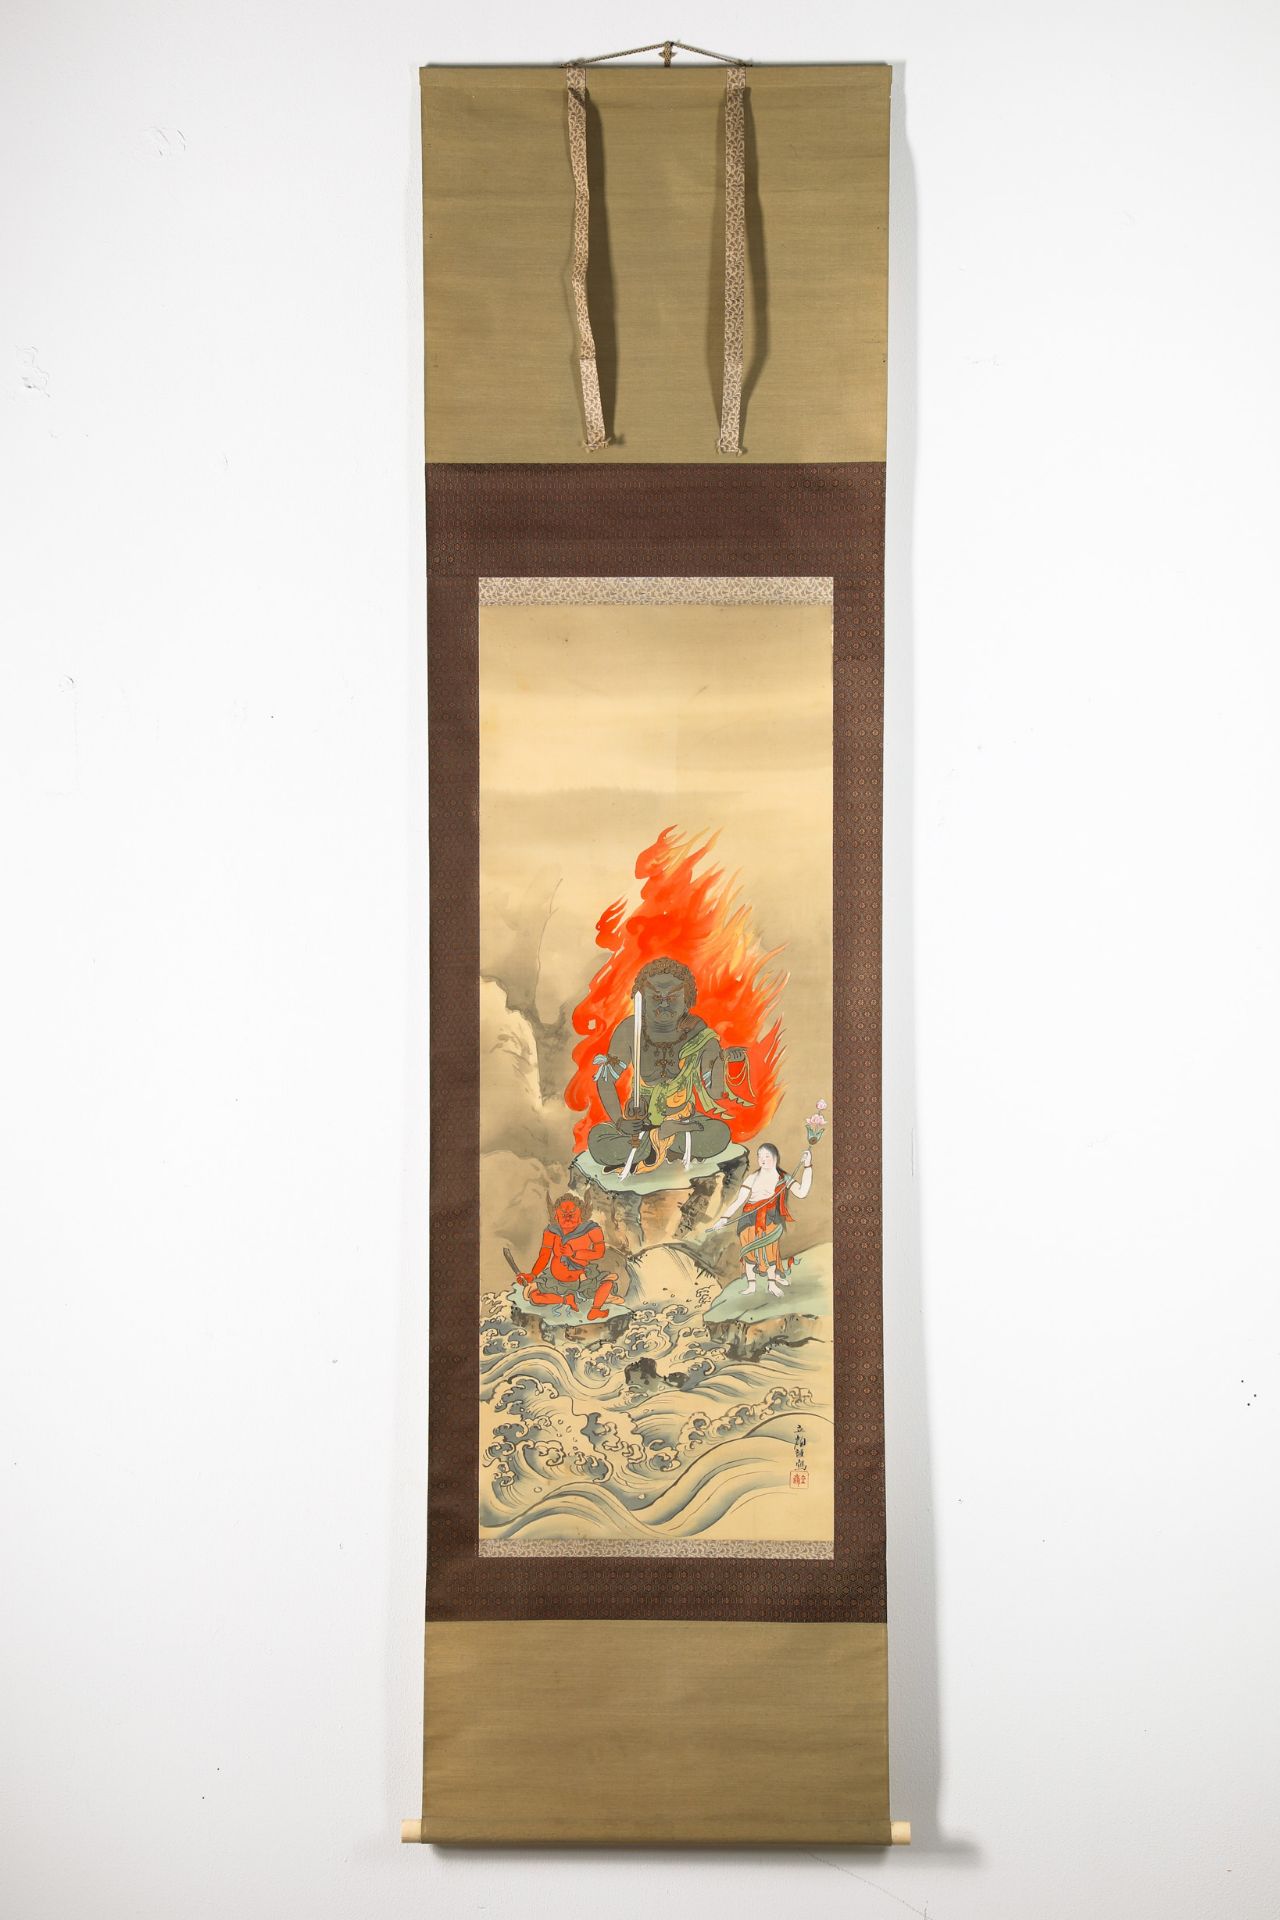 4 scroll paintings: landscape, dragon, figure in fire, warriors with bows (63, 136, 115, 96) - Image 6 of 10